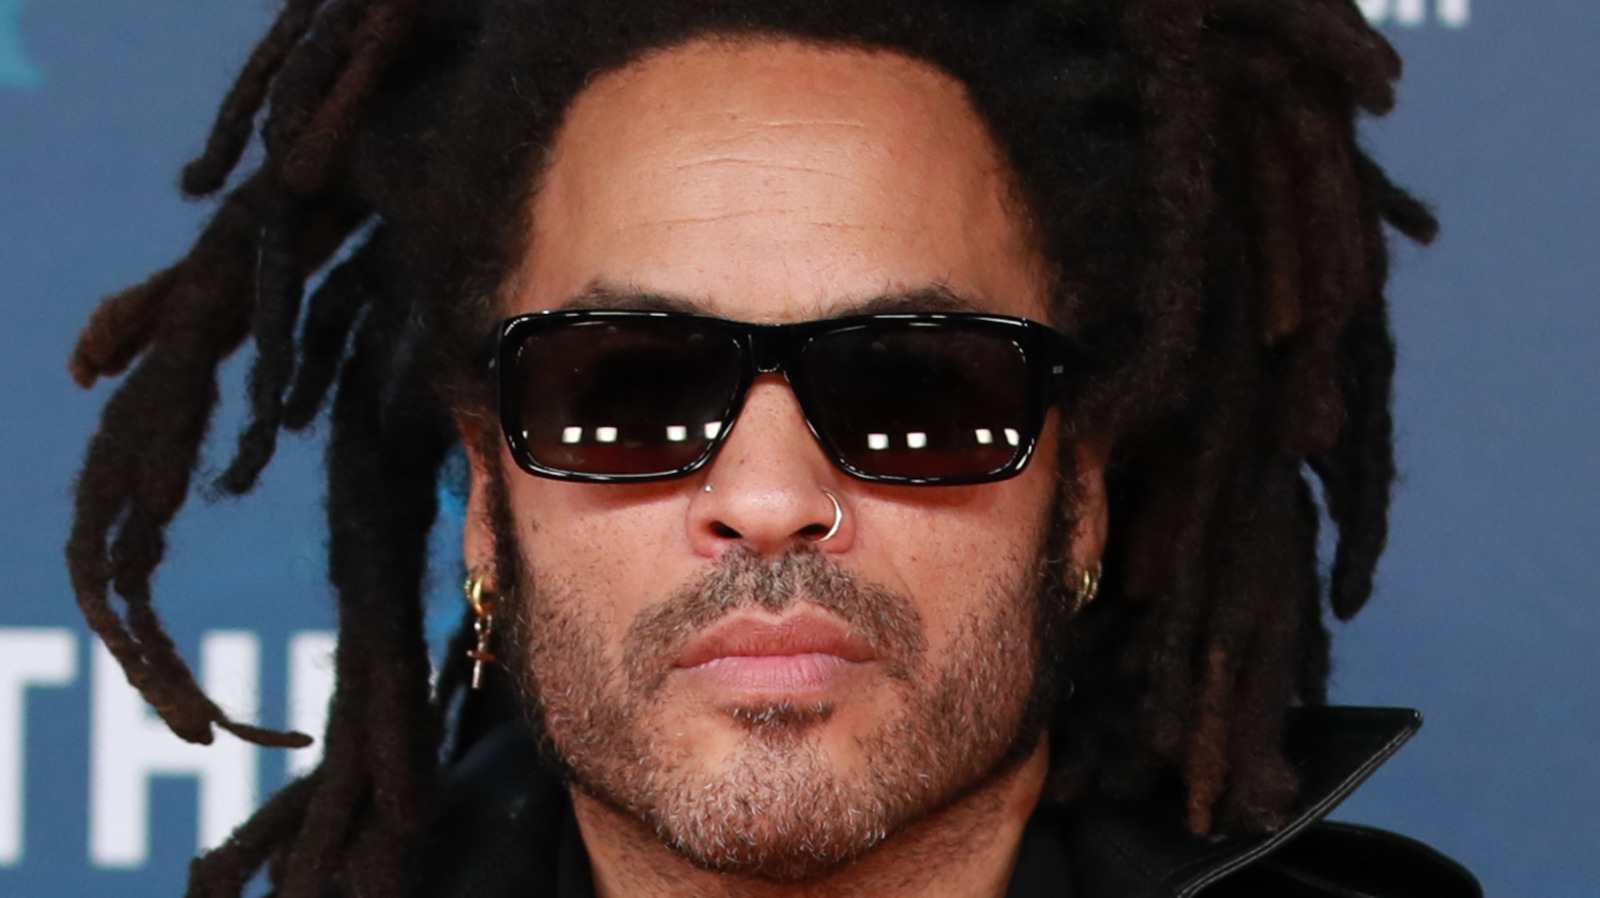 What You Didn't Know About Lenny Kravitz's Acting Career